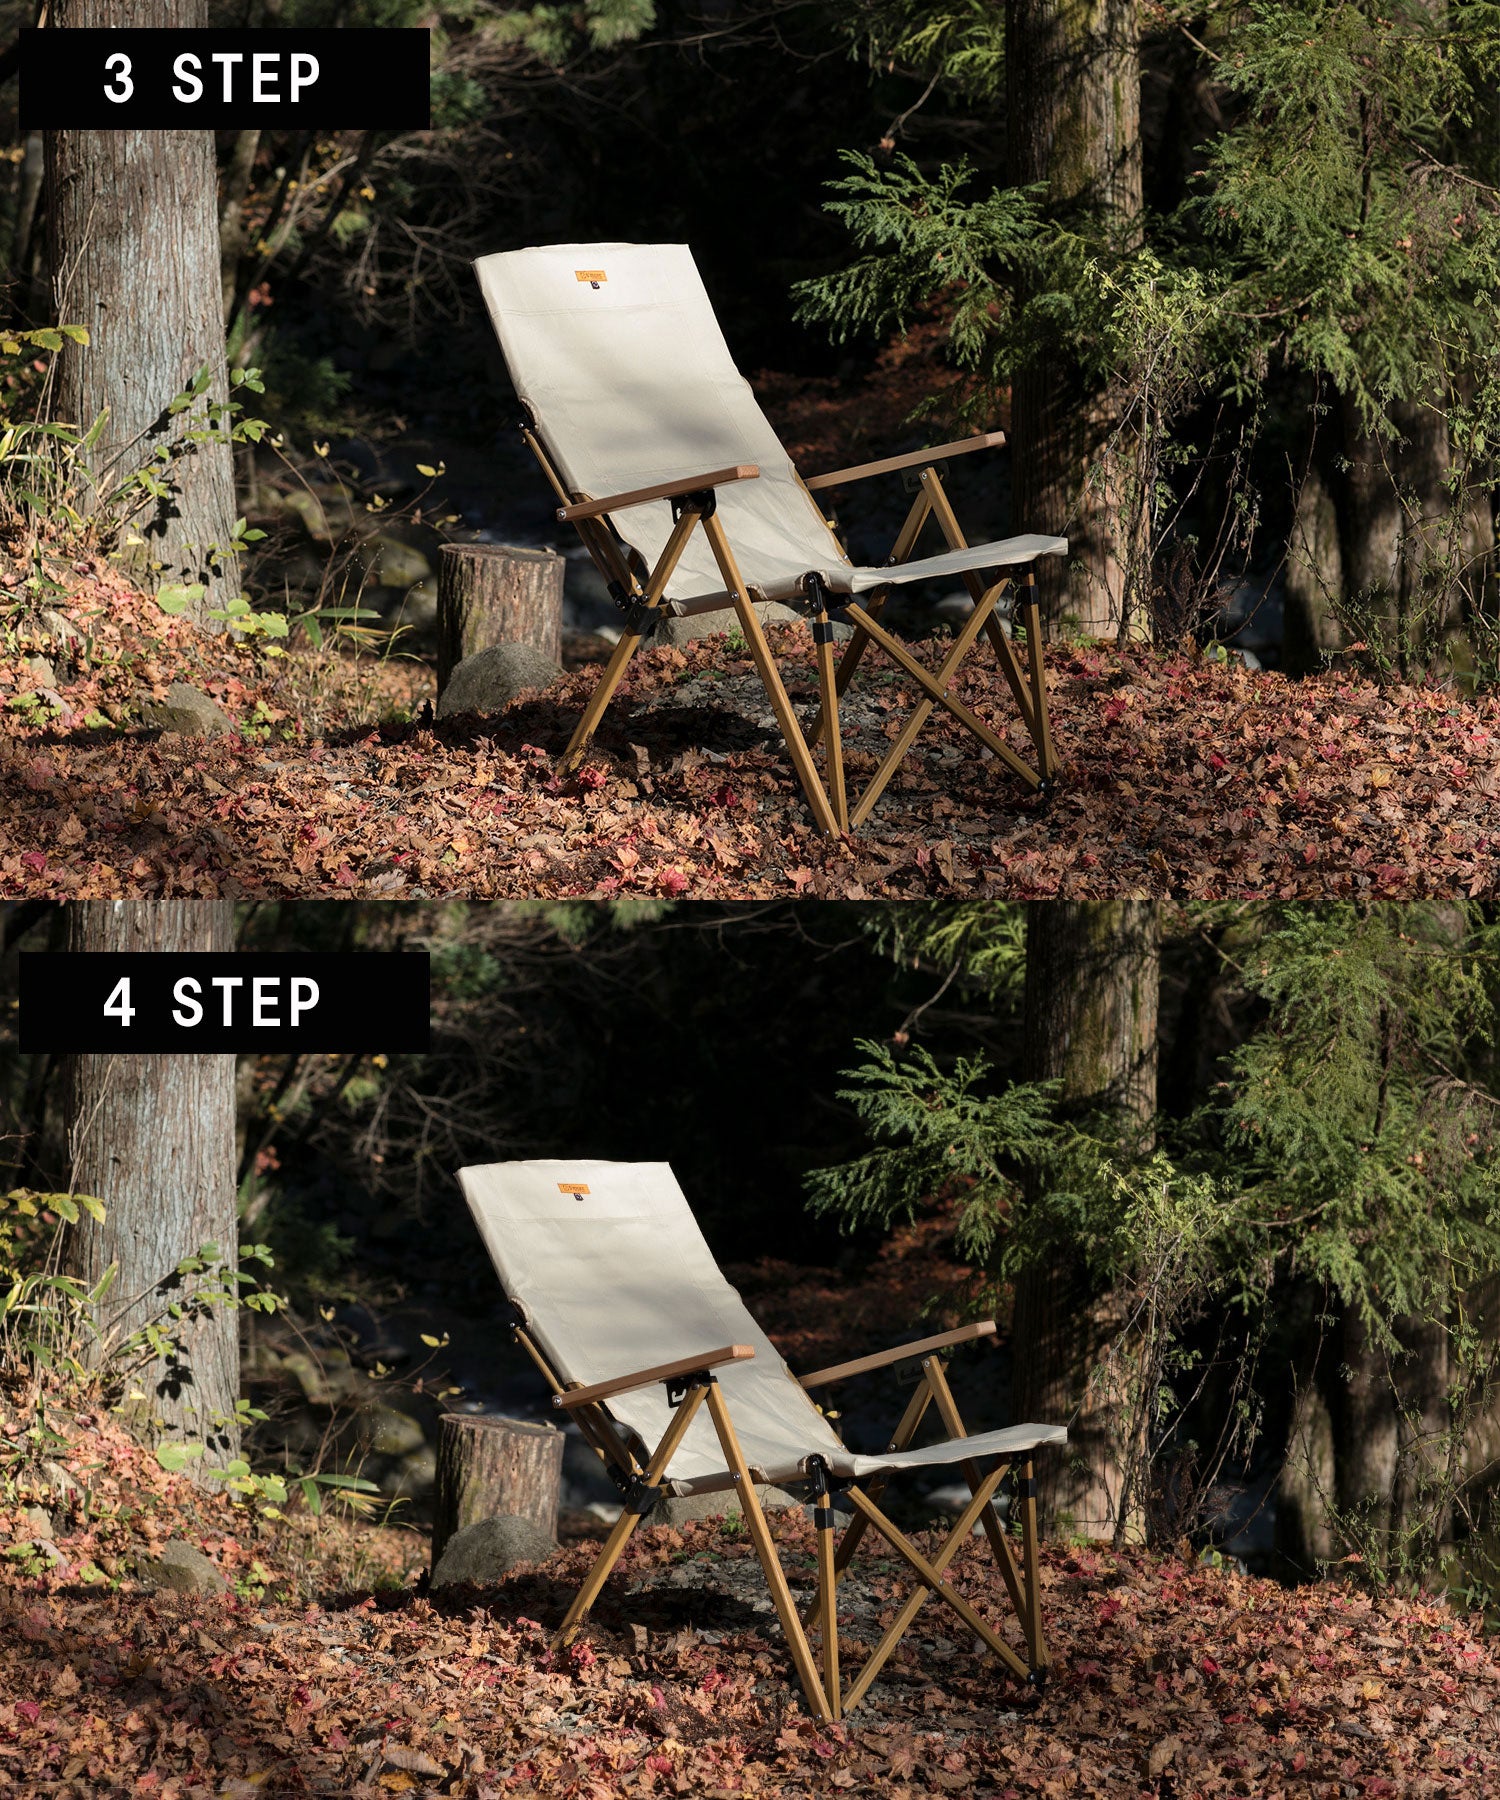 High back reclining chair 】 ハイバックリクライニングチェア 4段